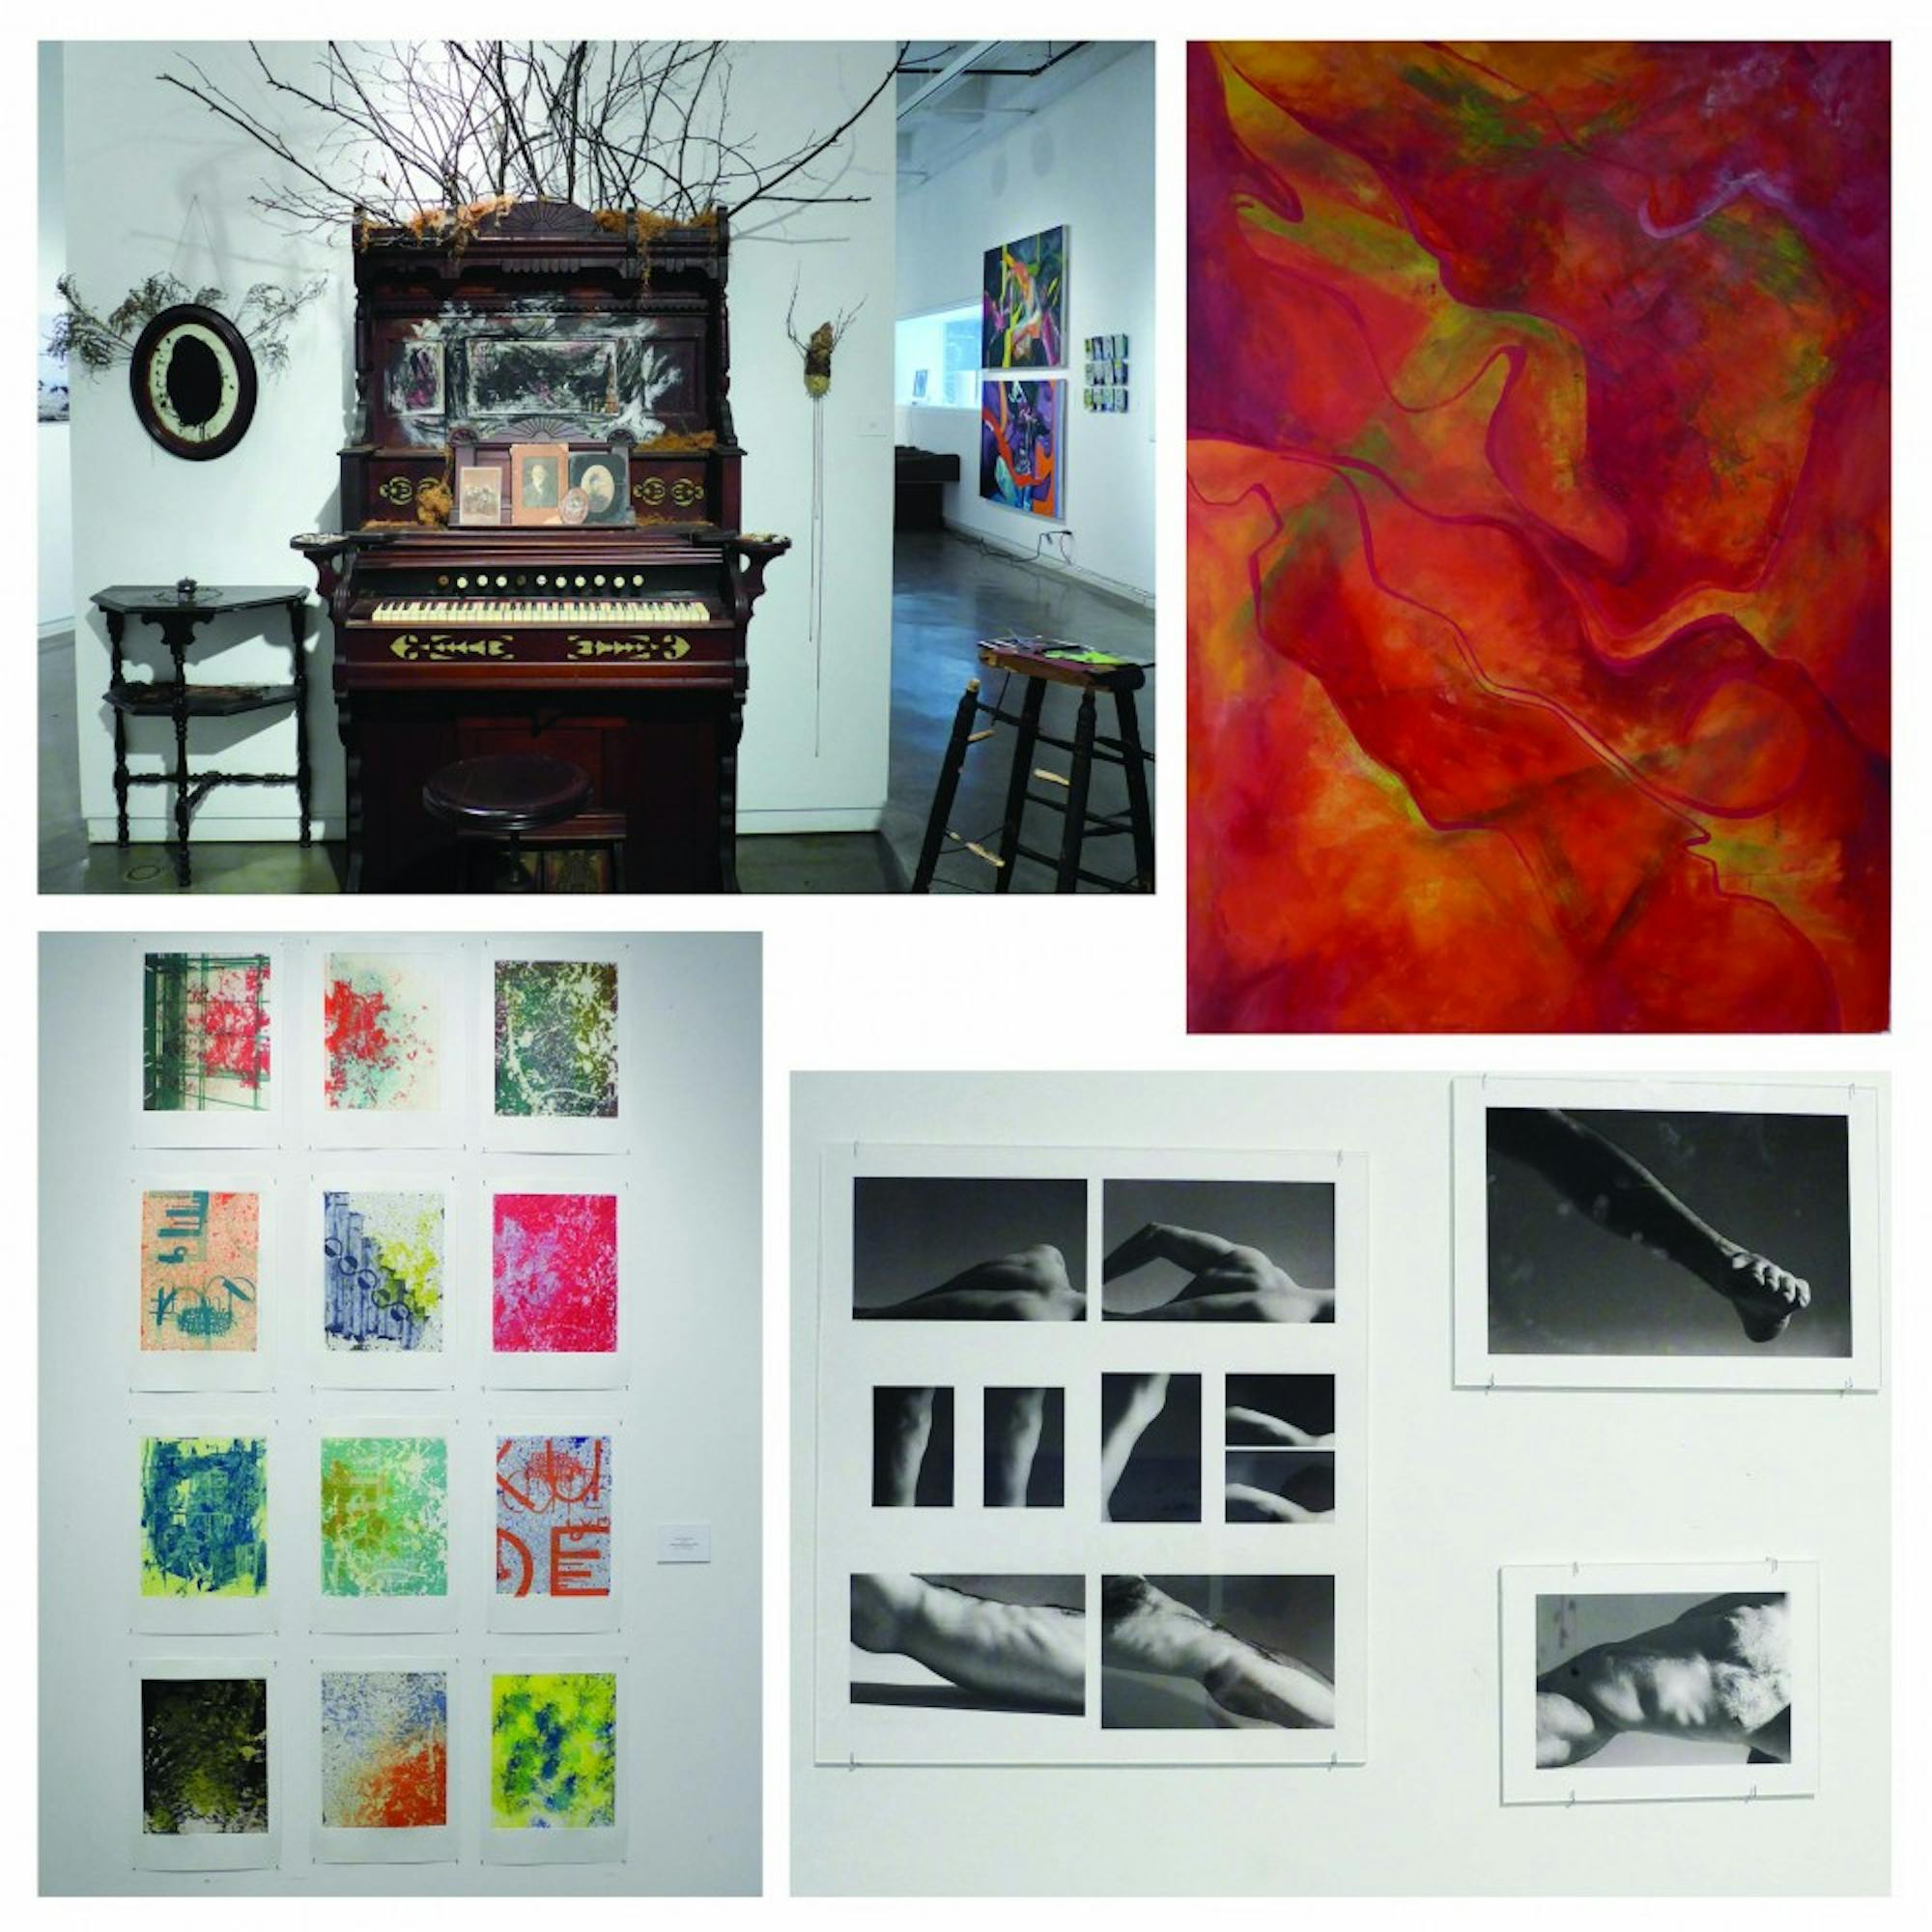 Clockwise from top left, works by Ryan Hueston '14, Alison Leung '14, Zac Moskow '14 and Lauren Gatewood '14.